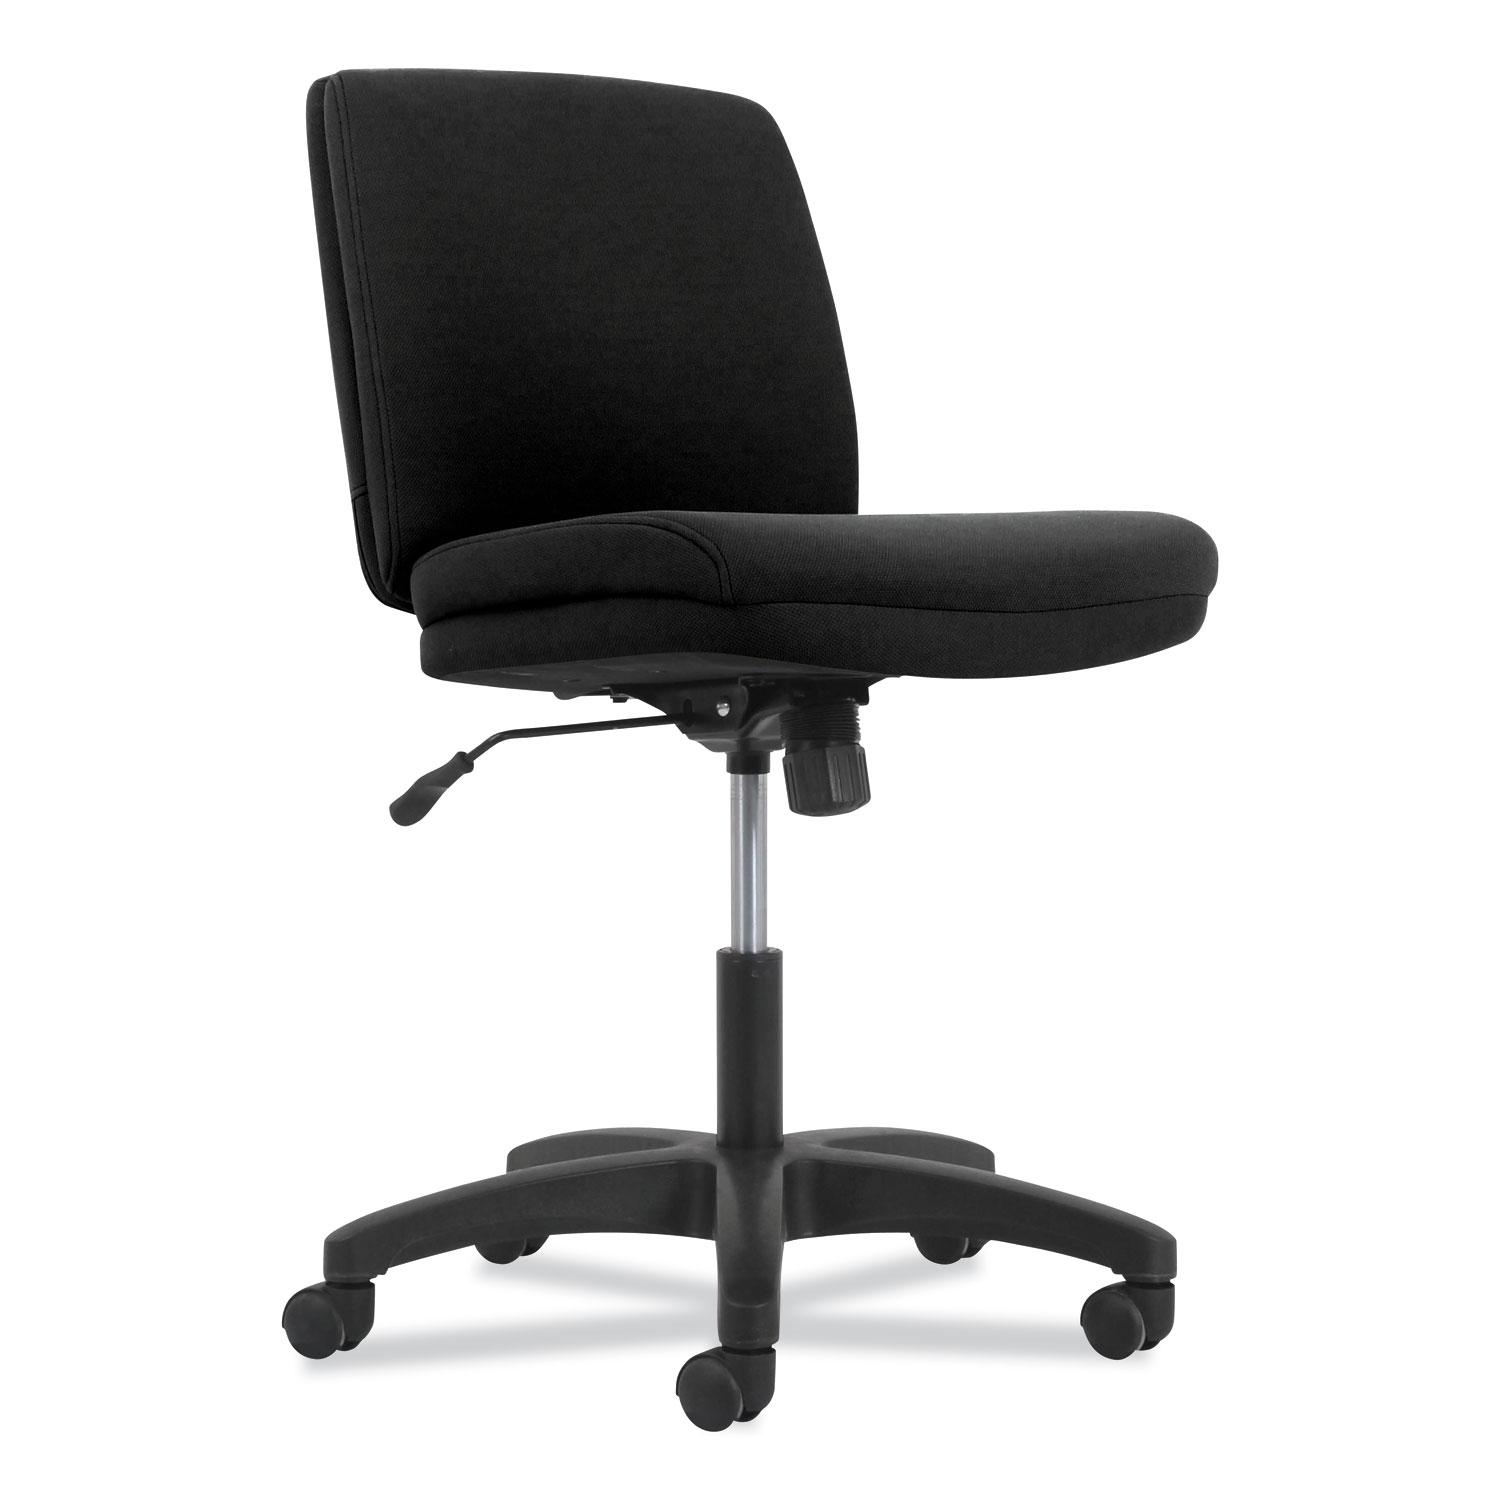  HON HONVL281Z1VA10T Network Low-Back Armless Chair, 18.7 x 16.5 x 21.5, Supports up to 250 lbs., Black Seat/Back and Base (HONVL281Z1VA10T) 